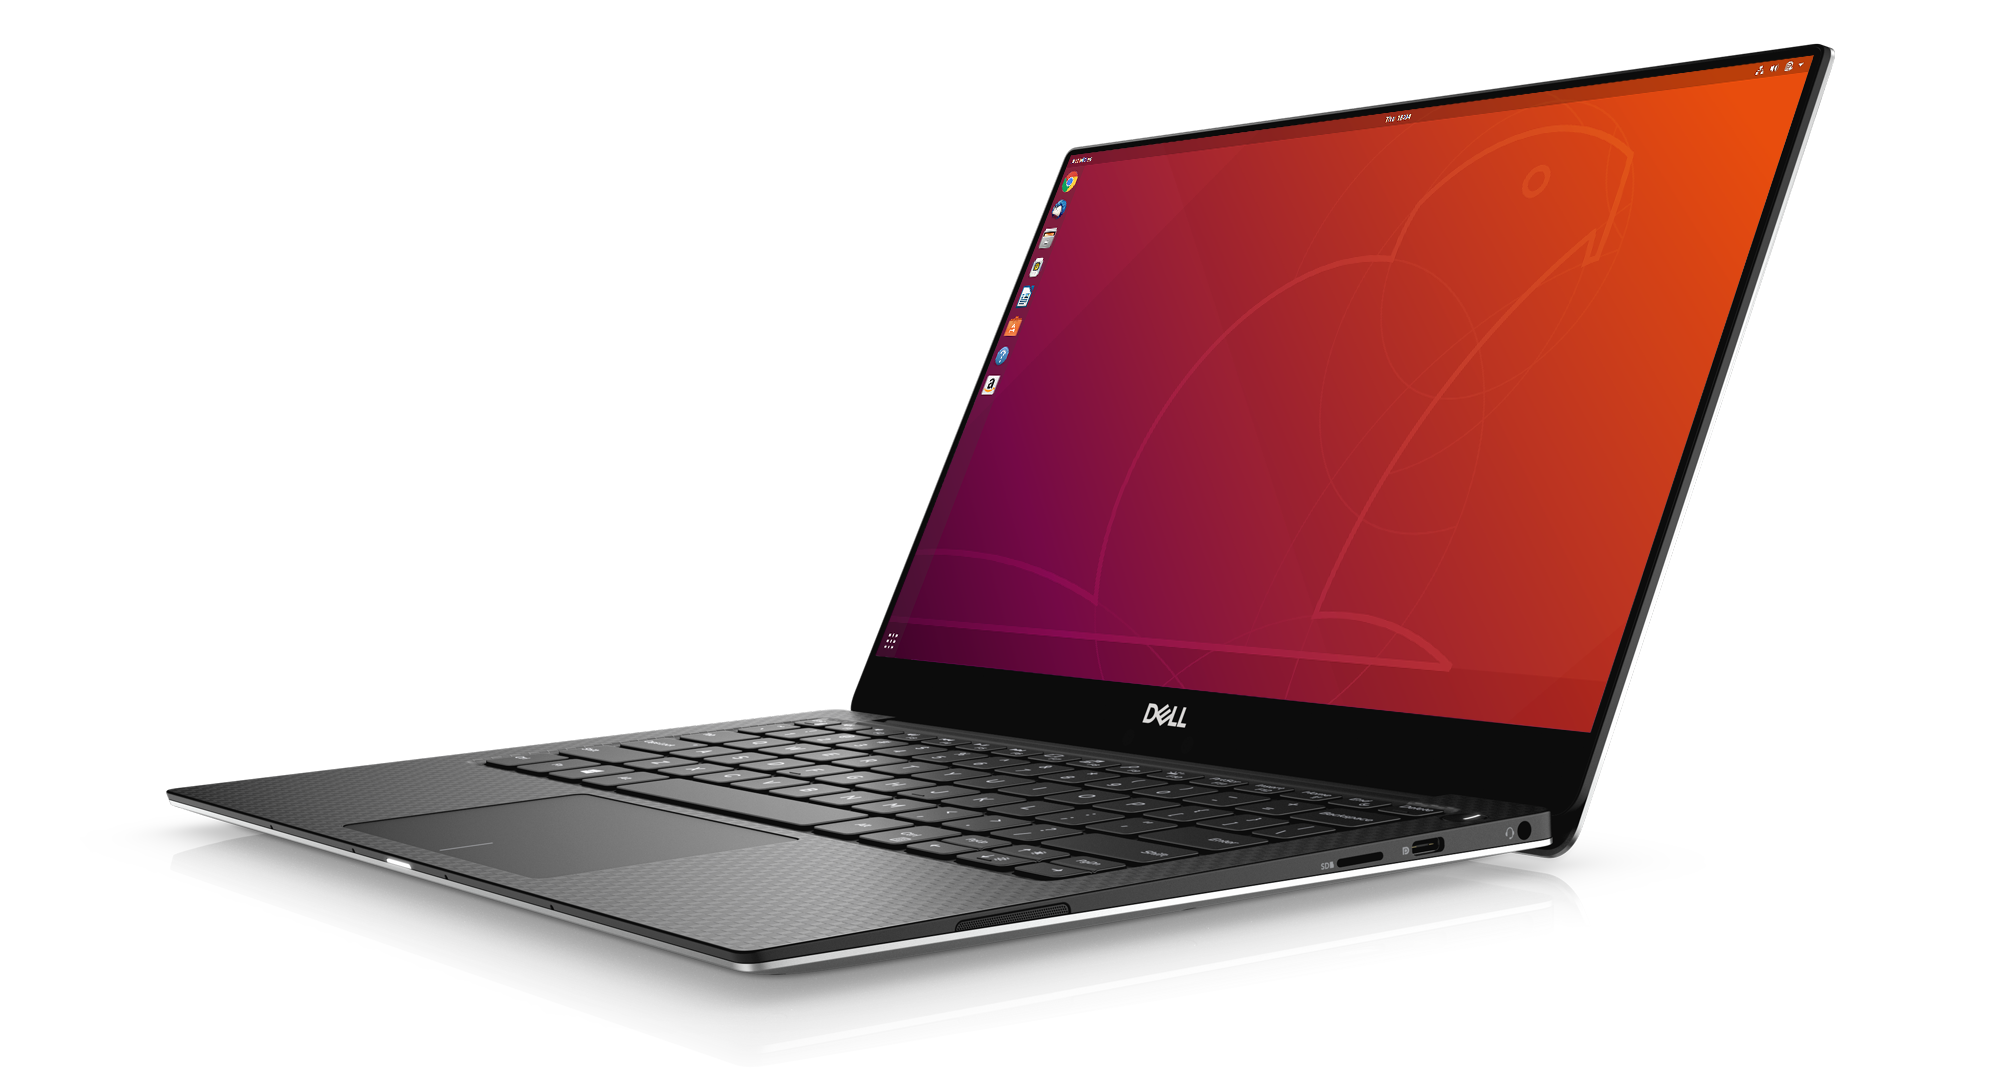 Dell XPS 13 (9370) Developer Edition finally available with Ubuntu Linux 18.04 LTS